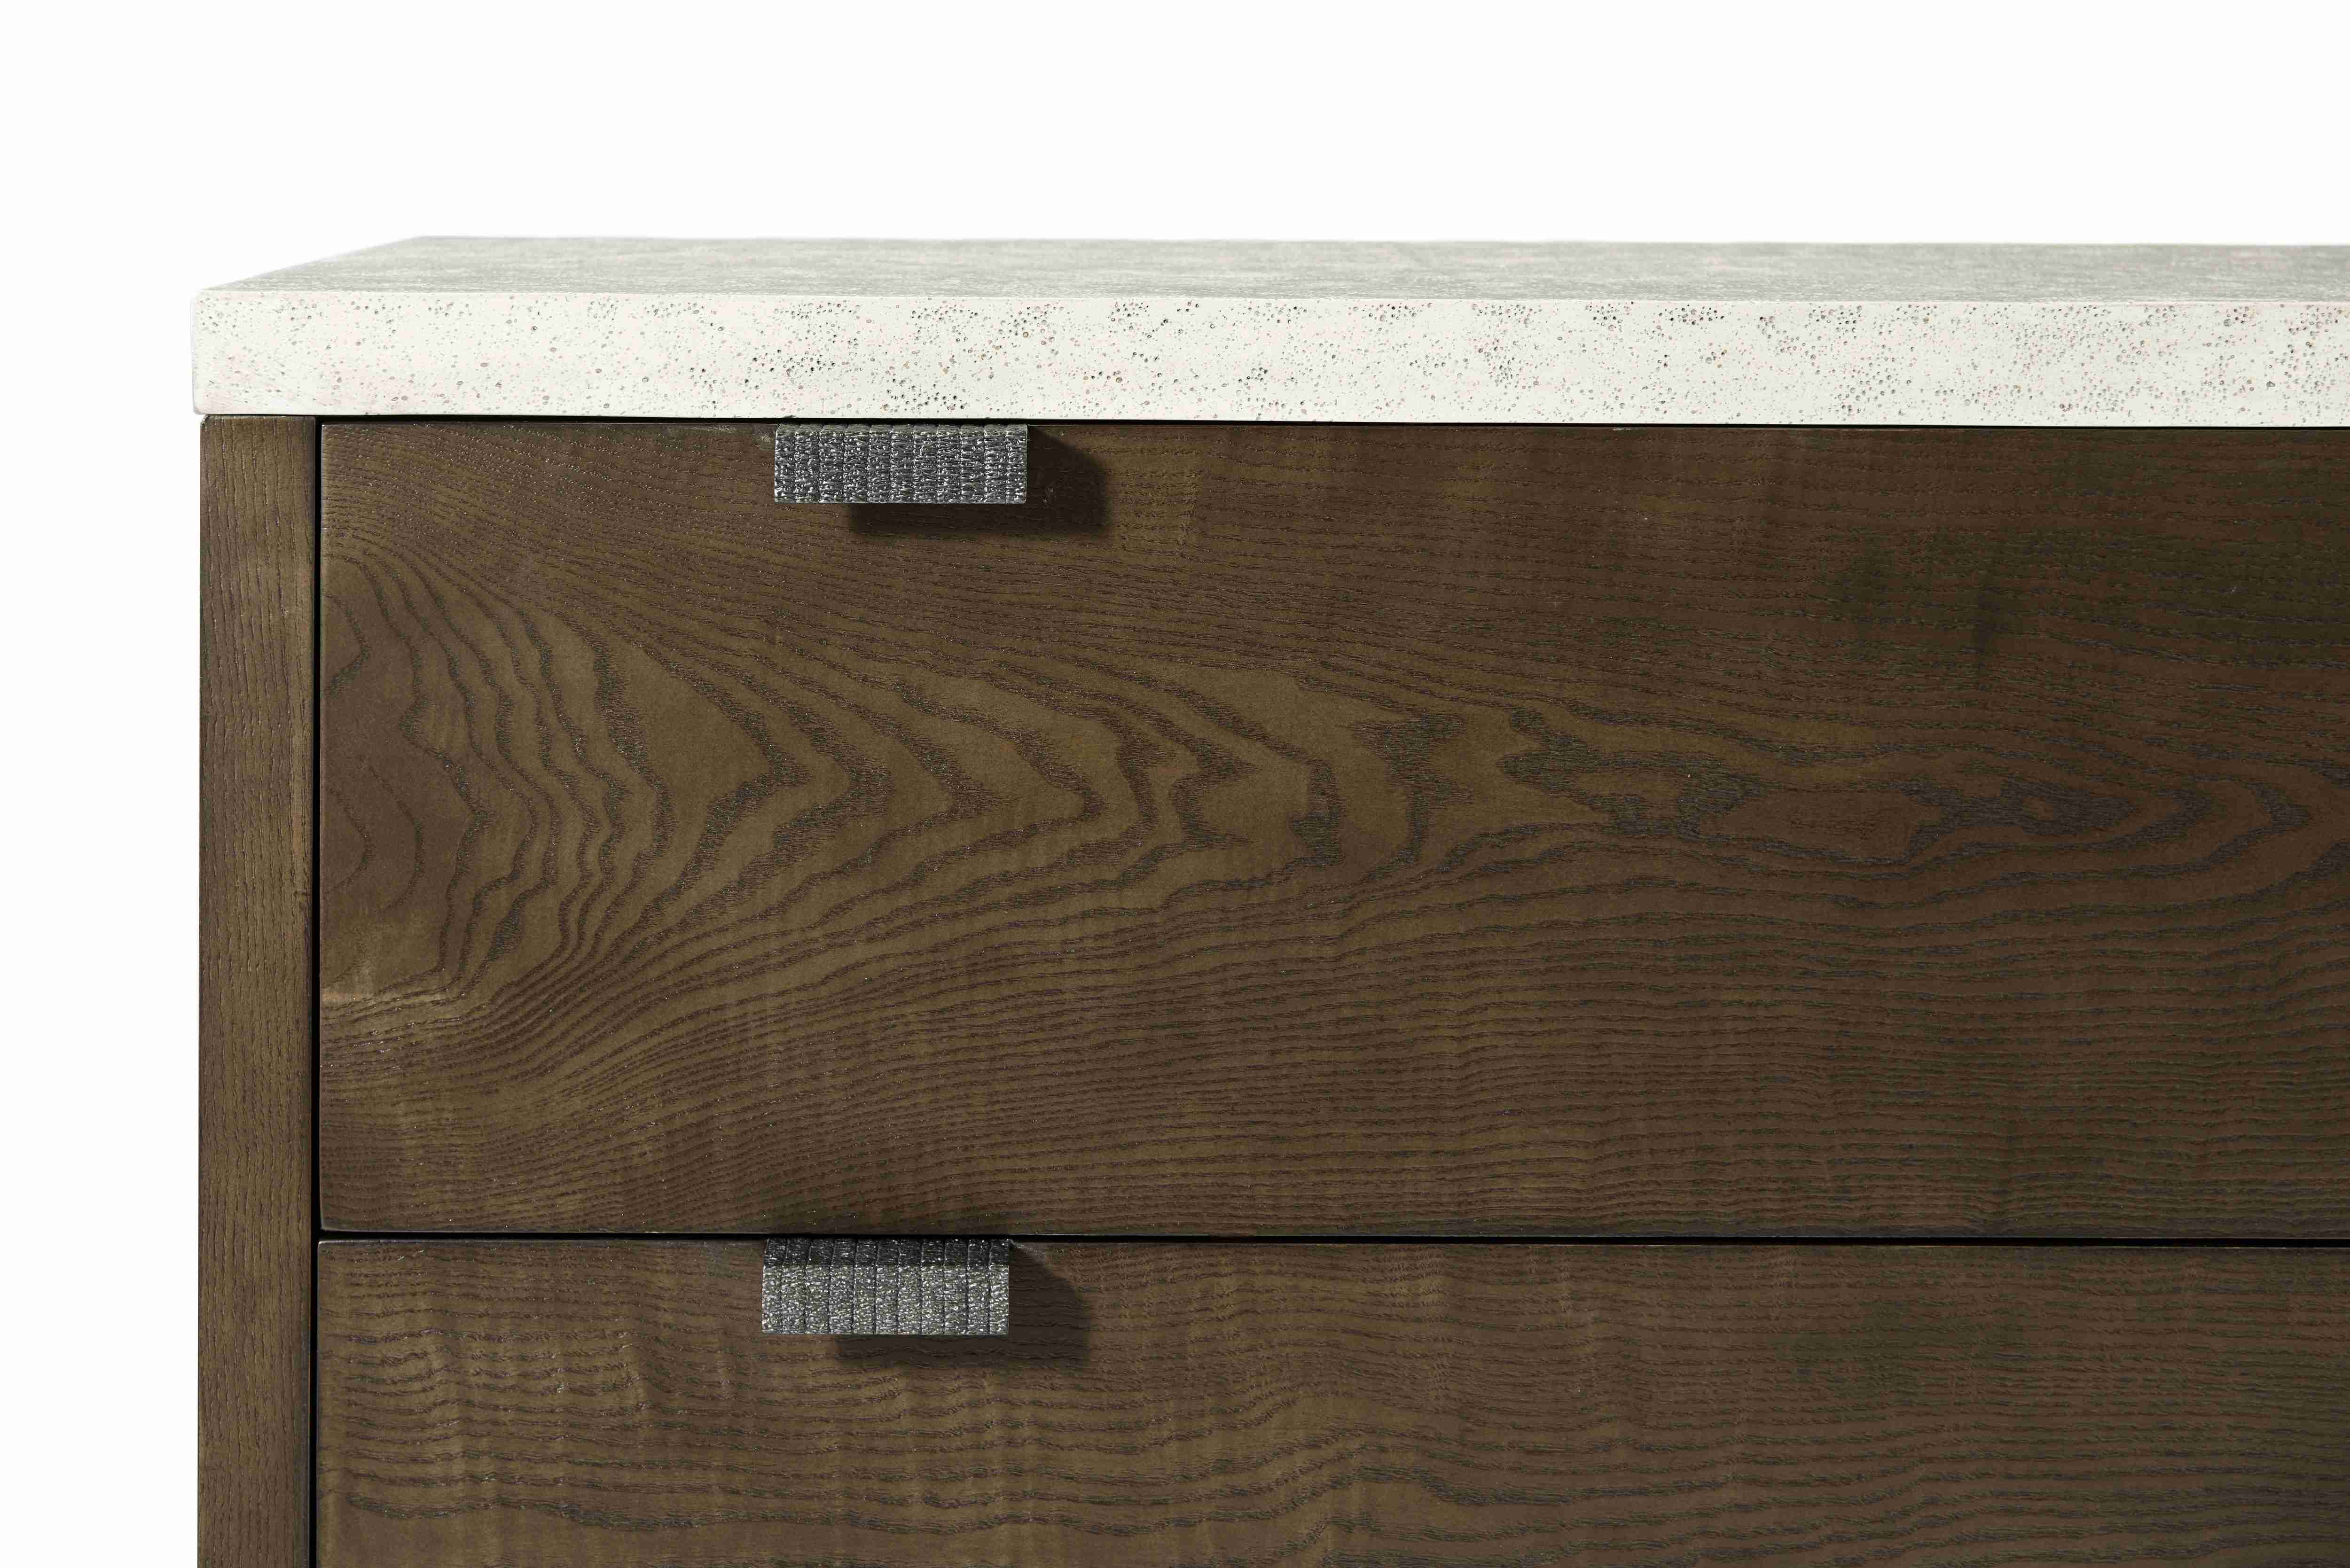 CATALINA CHEST OF DRAWERS